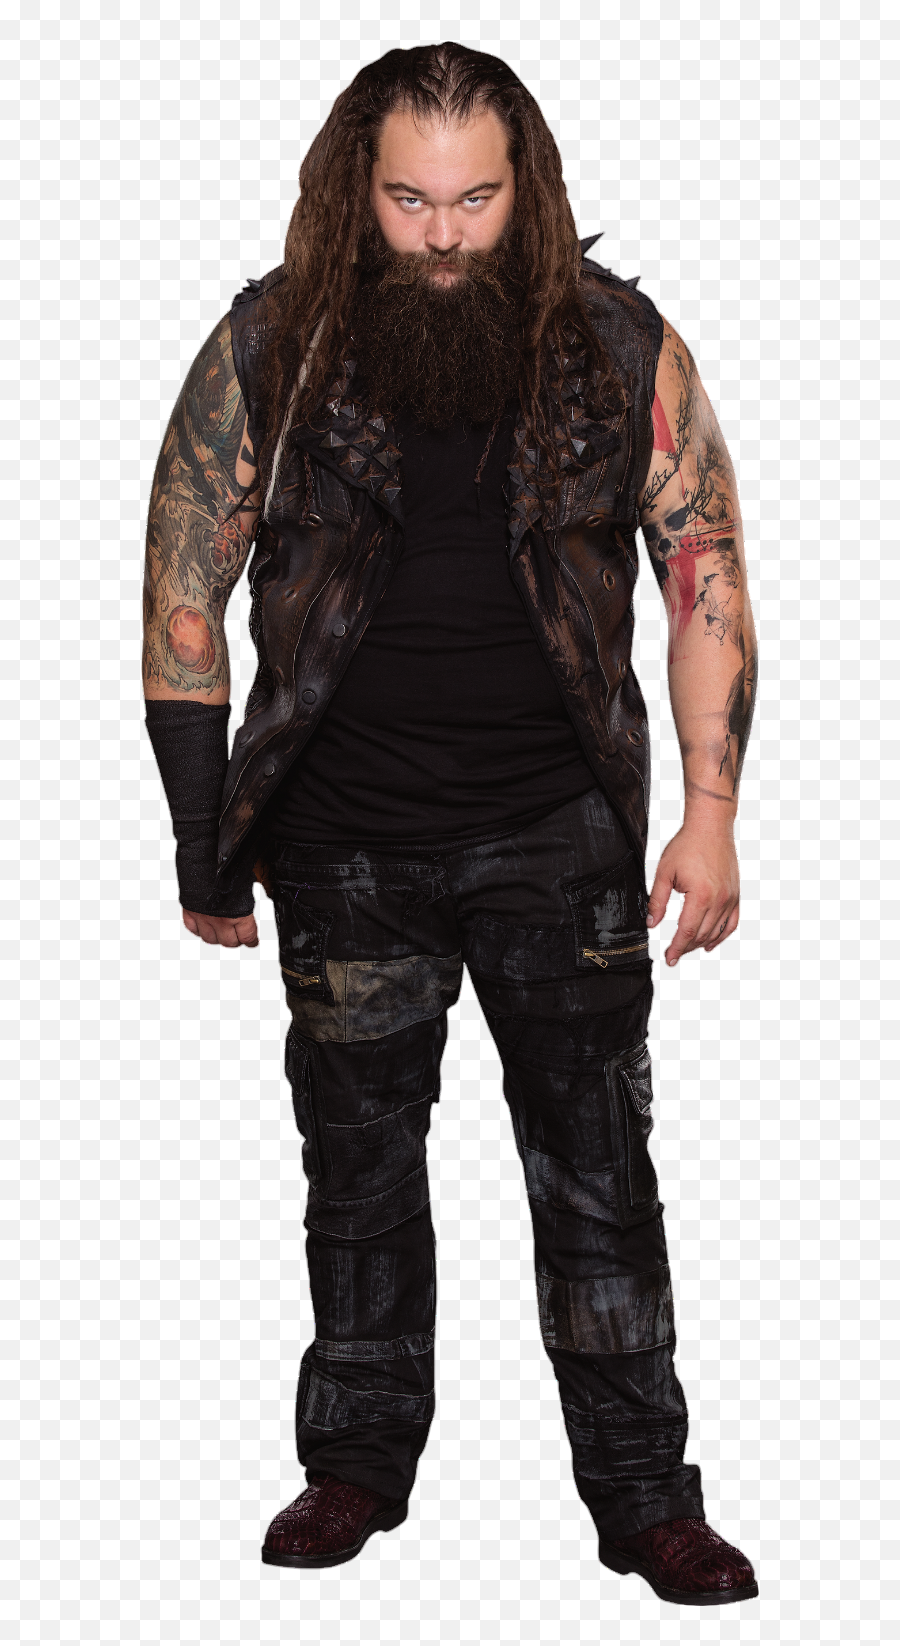 Bray wyatt png images